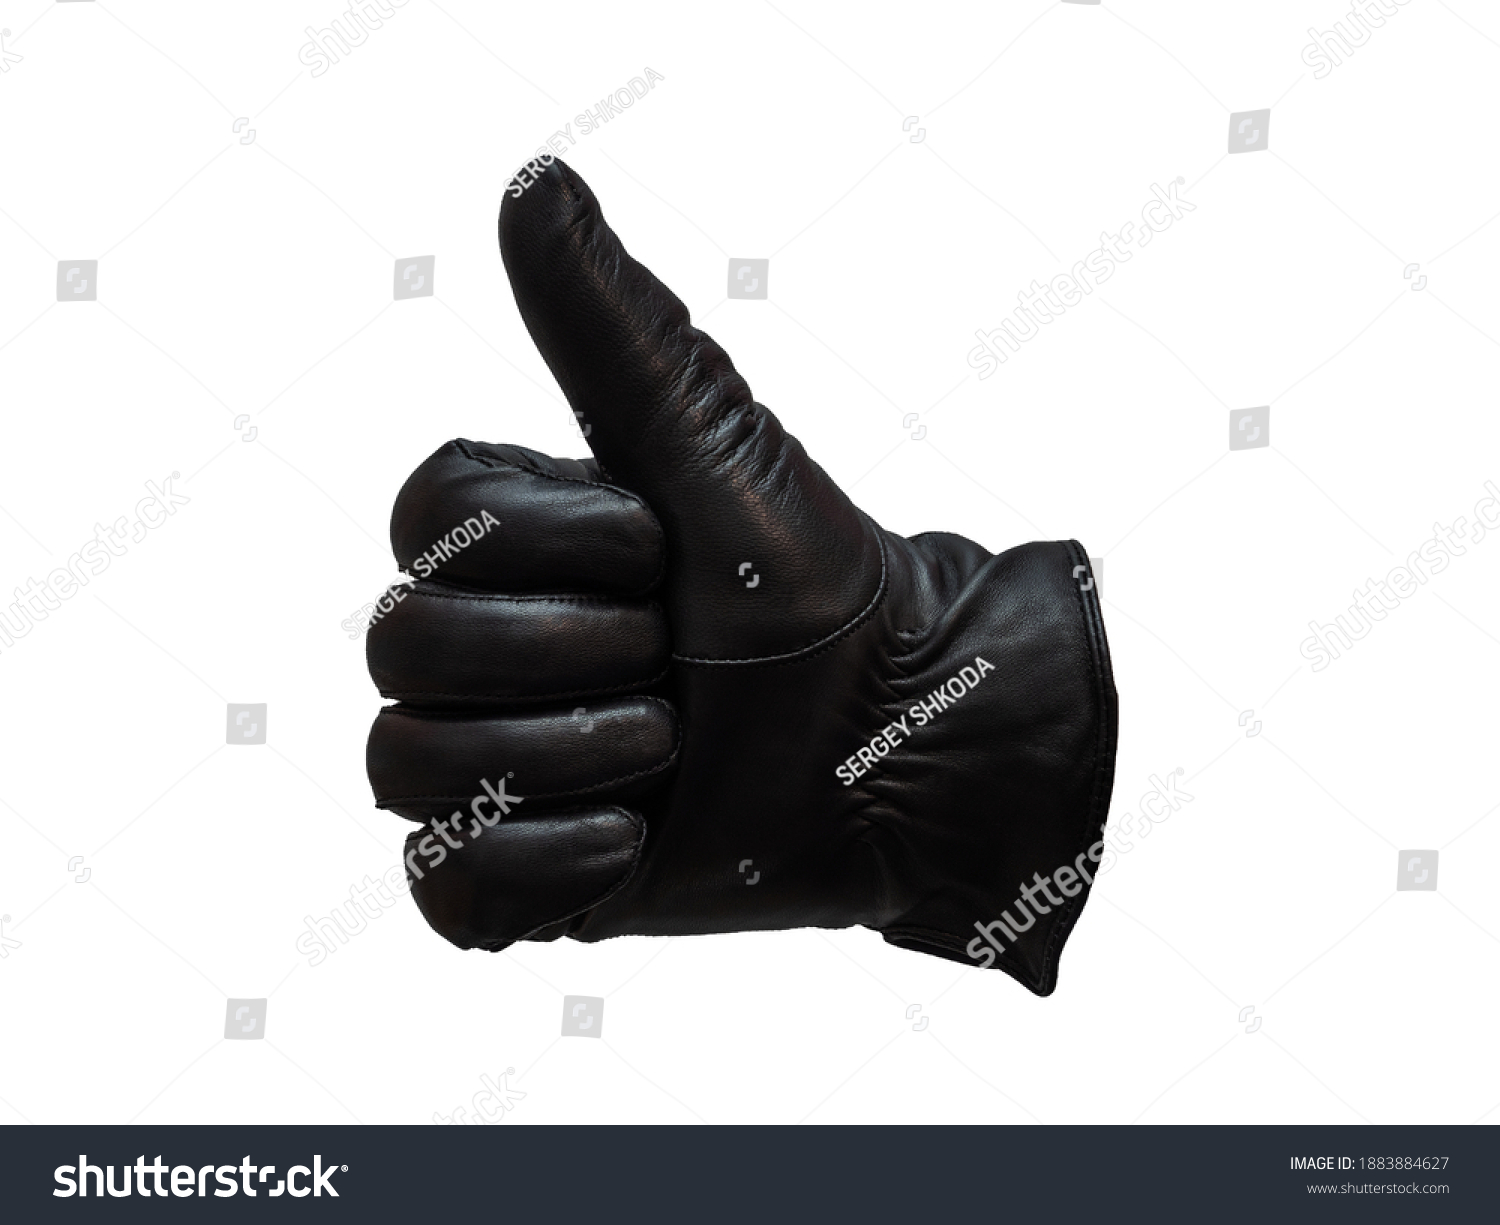 black leather glove shows gesture thumb up. isolated white background. #1883884627